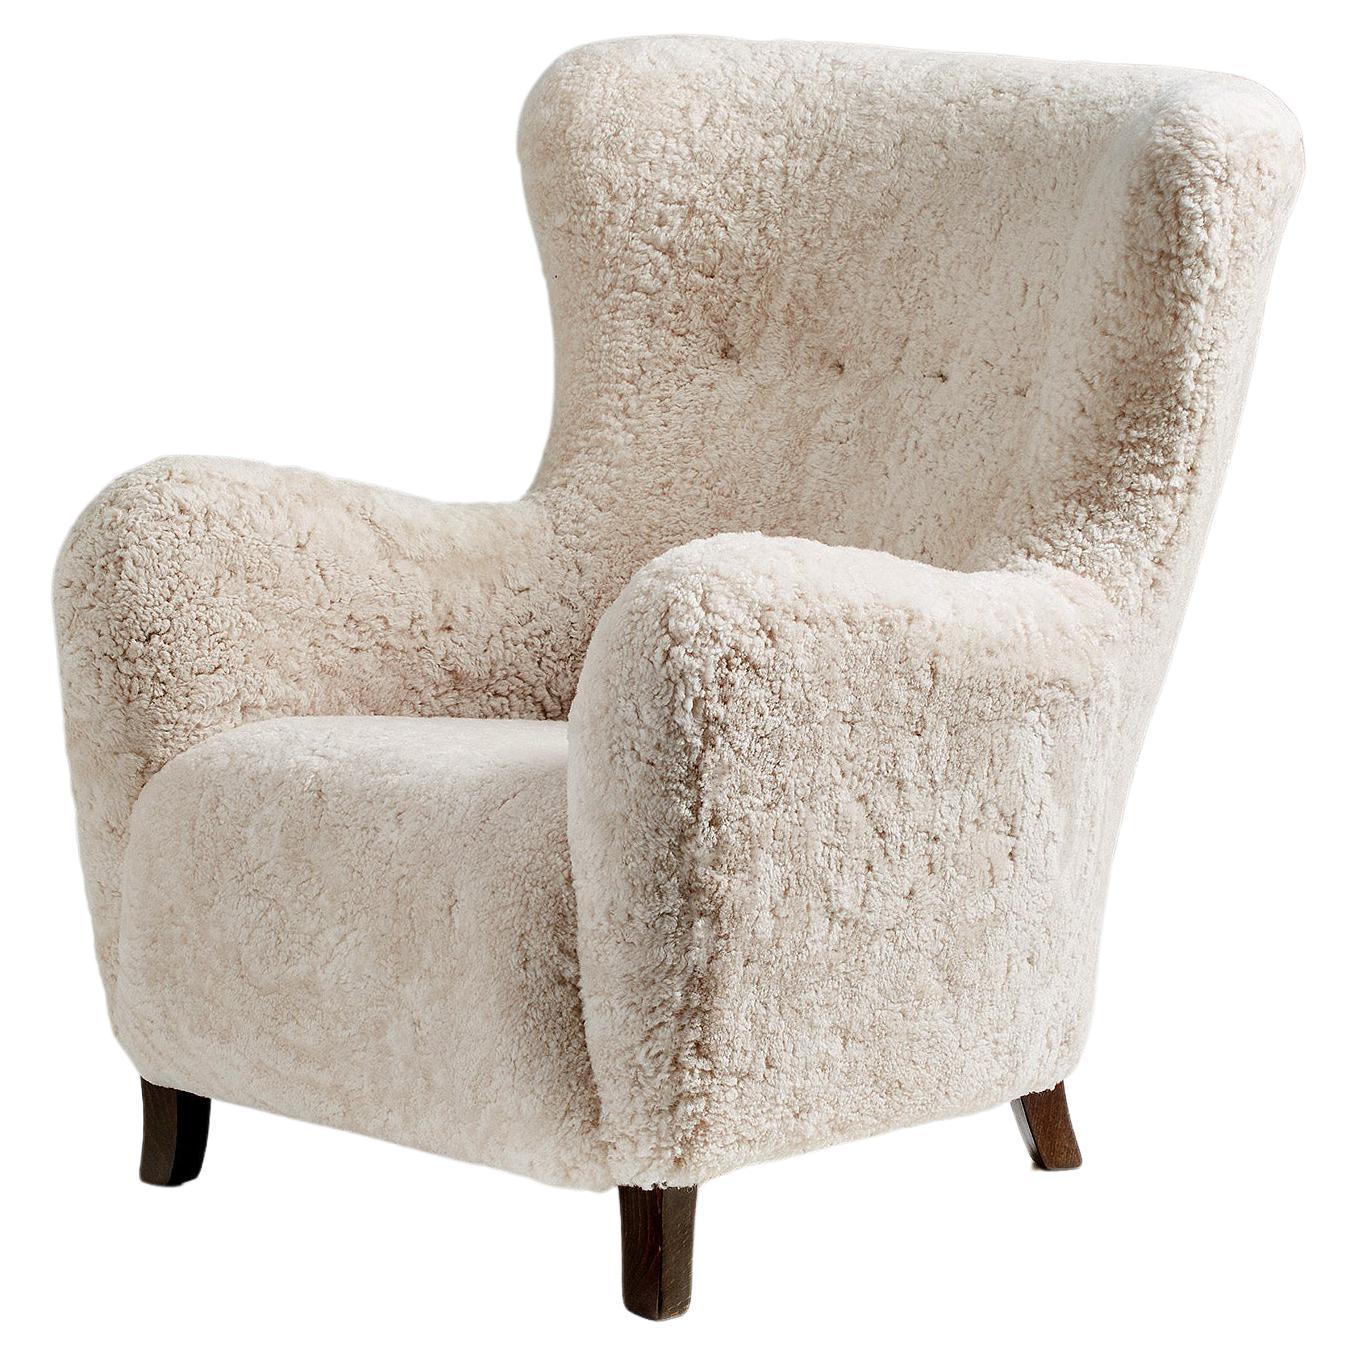 Pair of Custom Made Sampo Sheepskin Wing Chairs For Sale